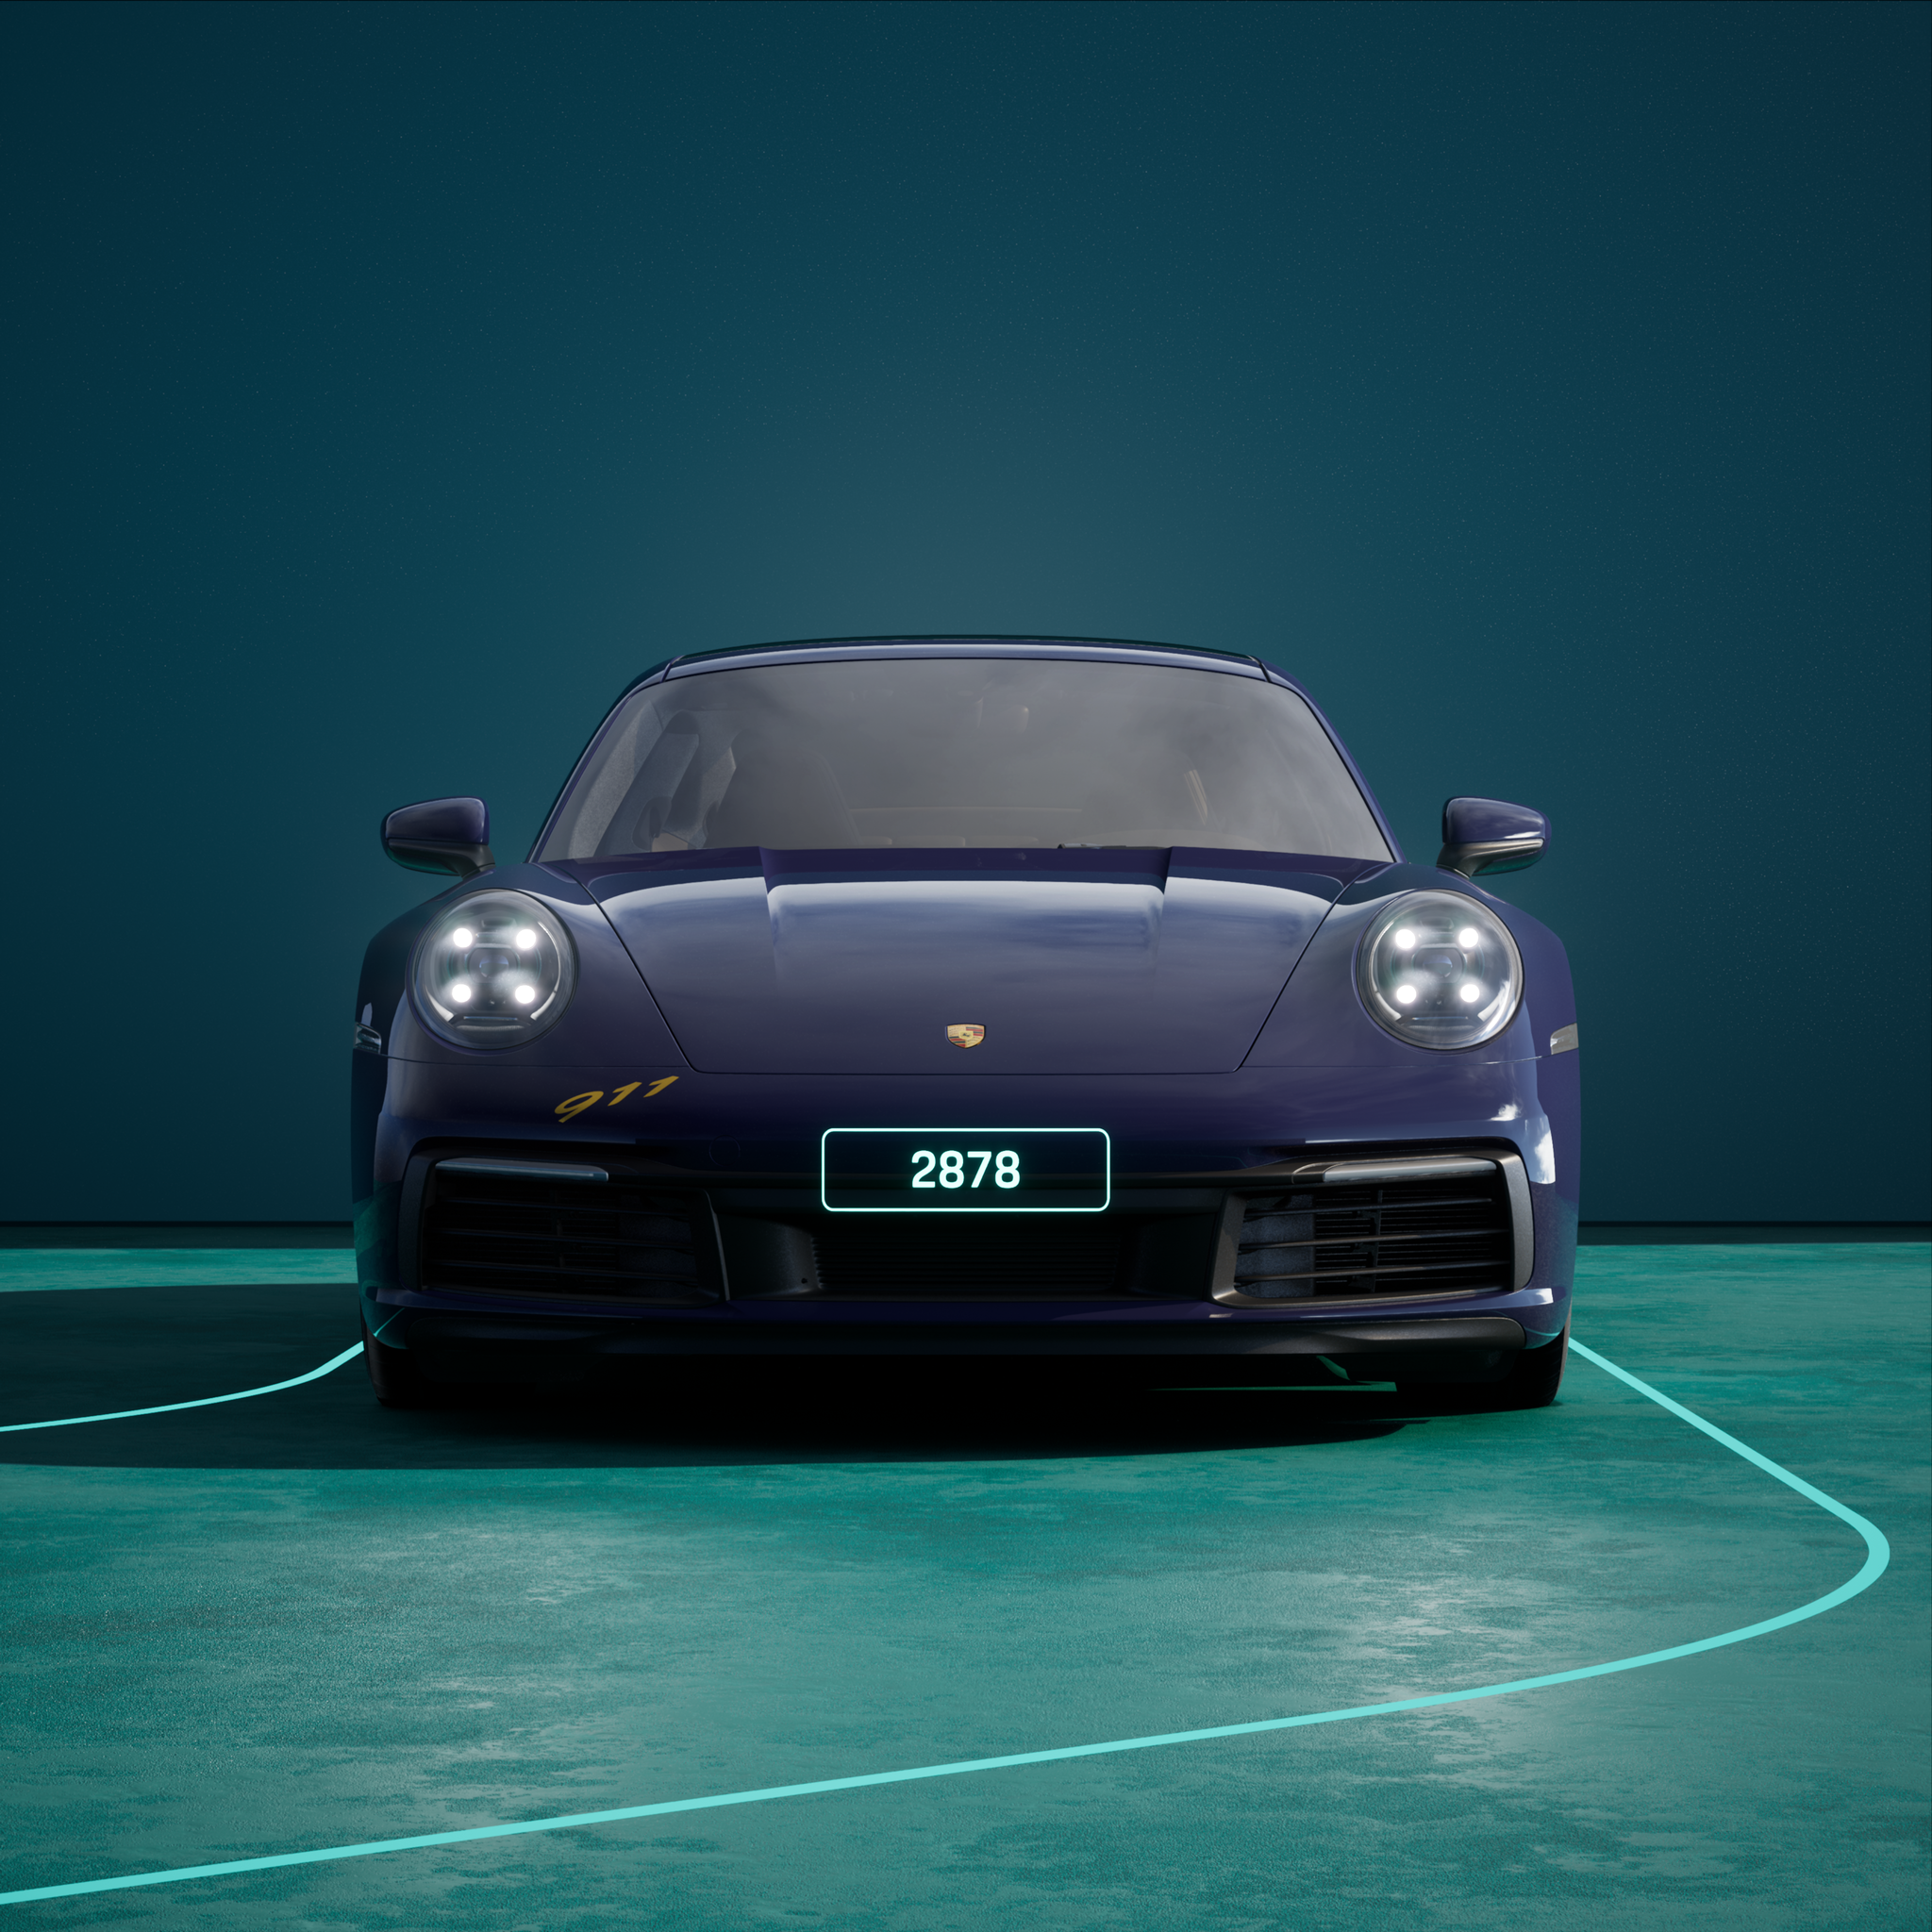 The PORSCHΞ 911 2878 image in phase